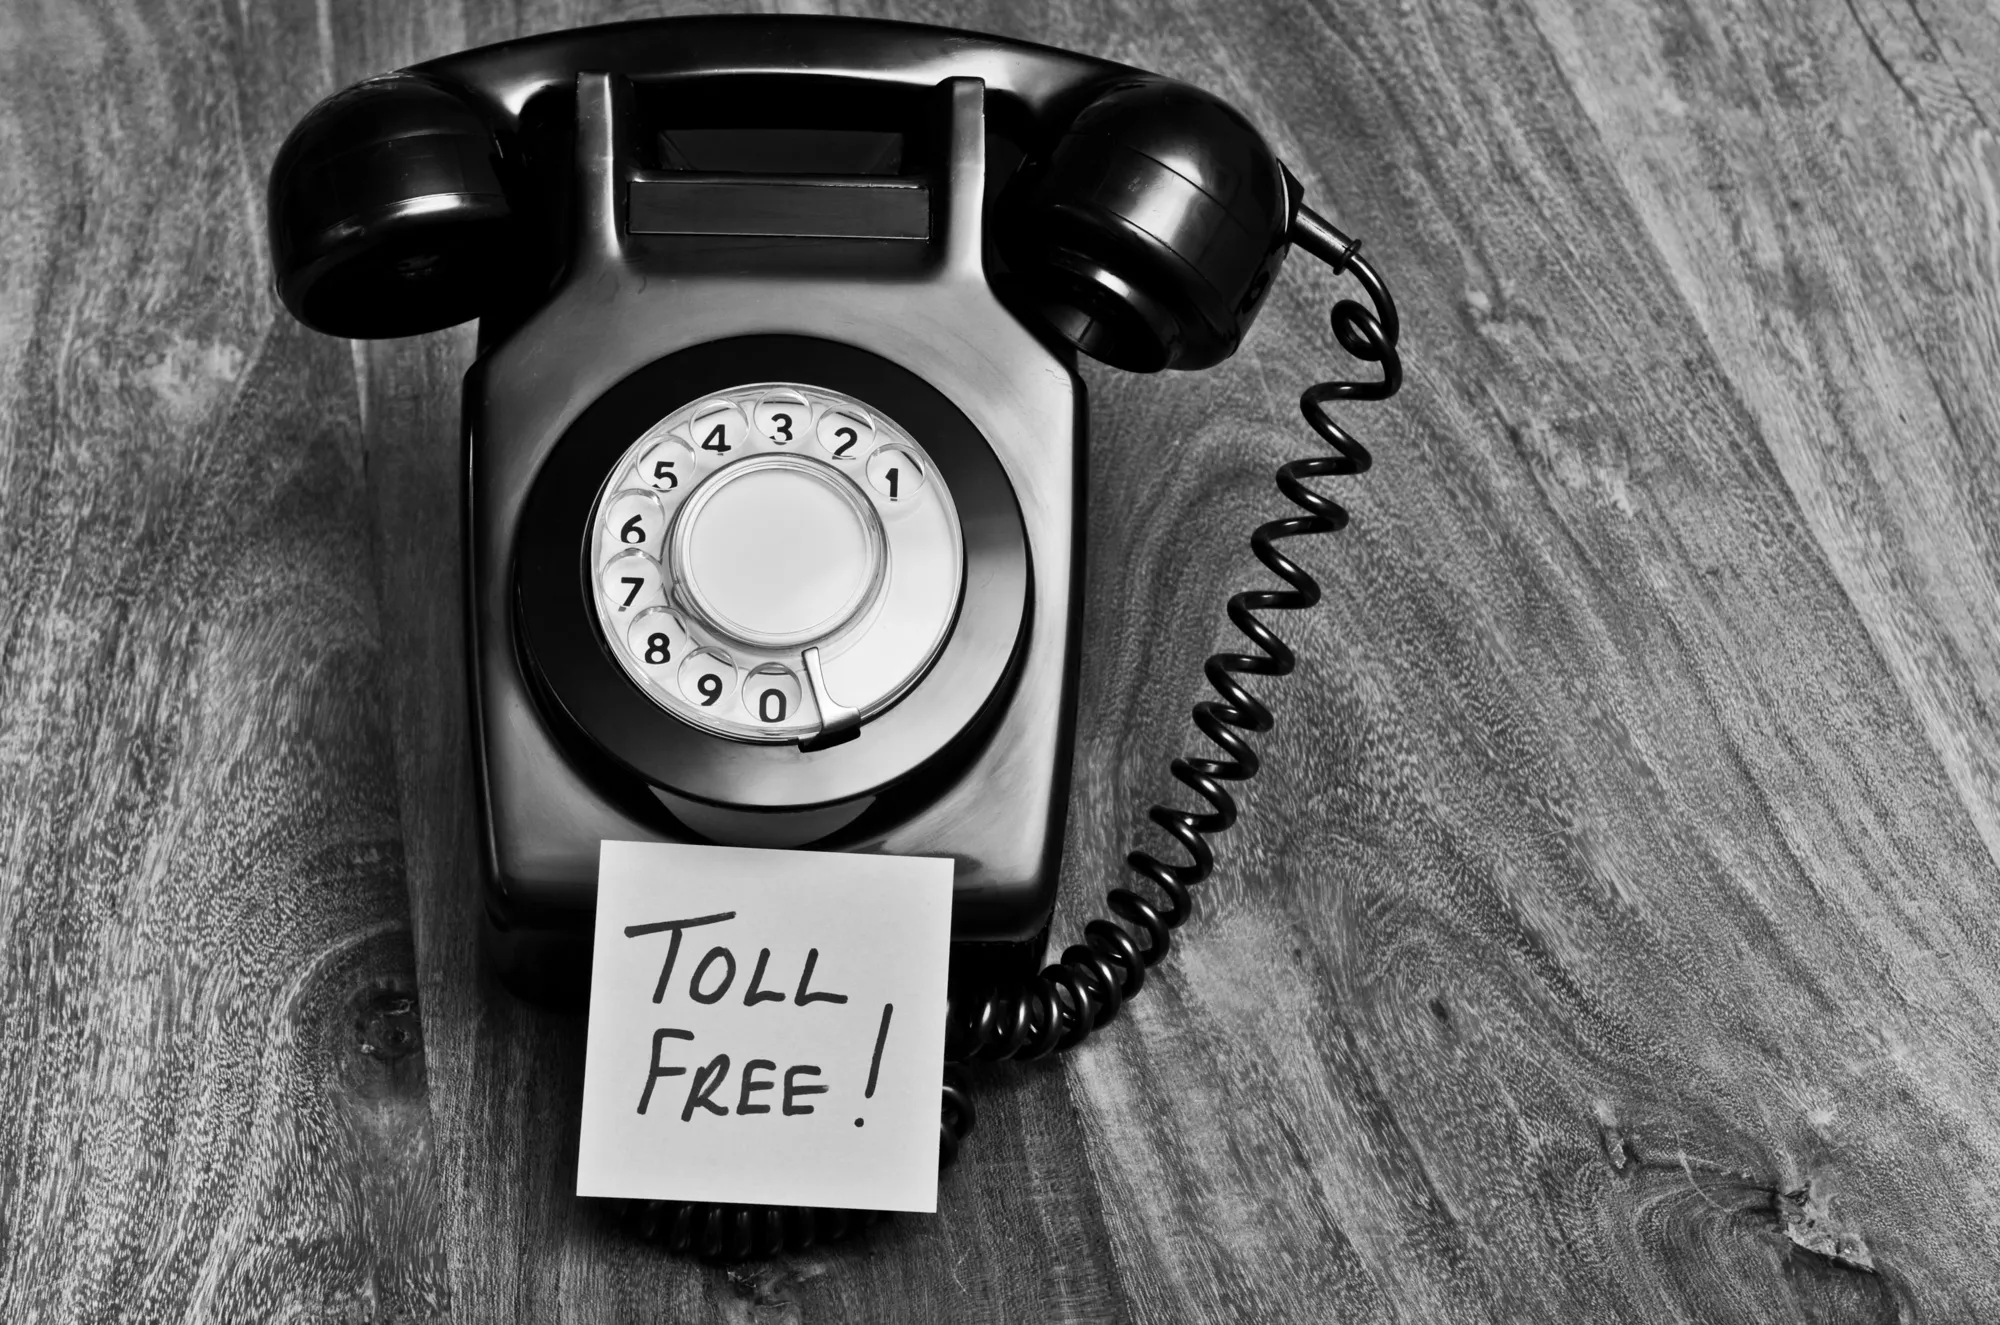 Toll-Free Number